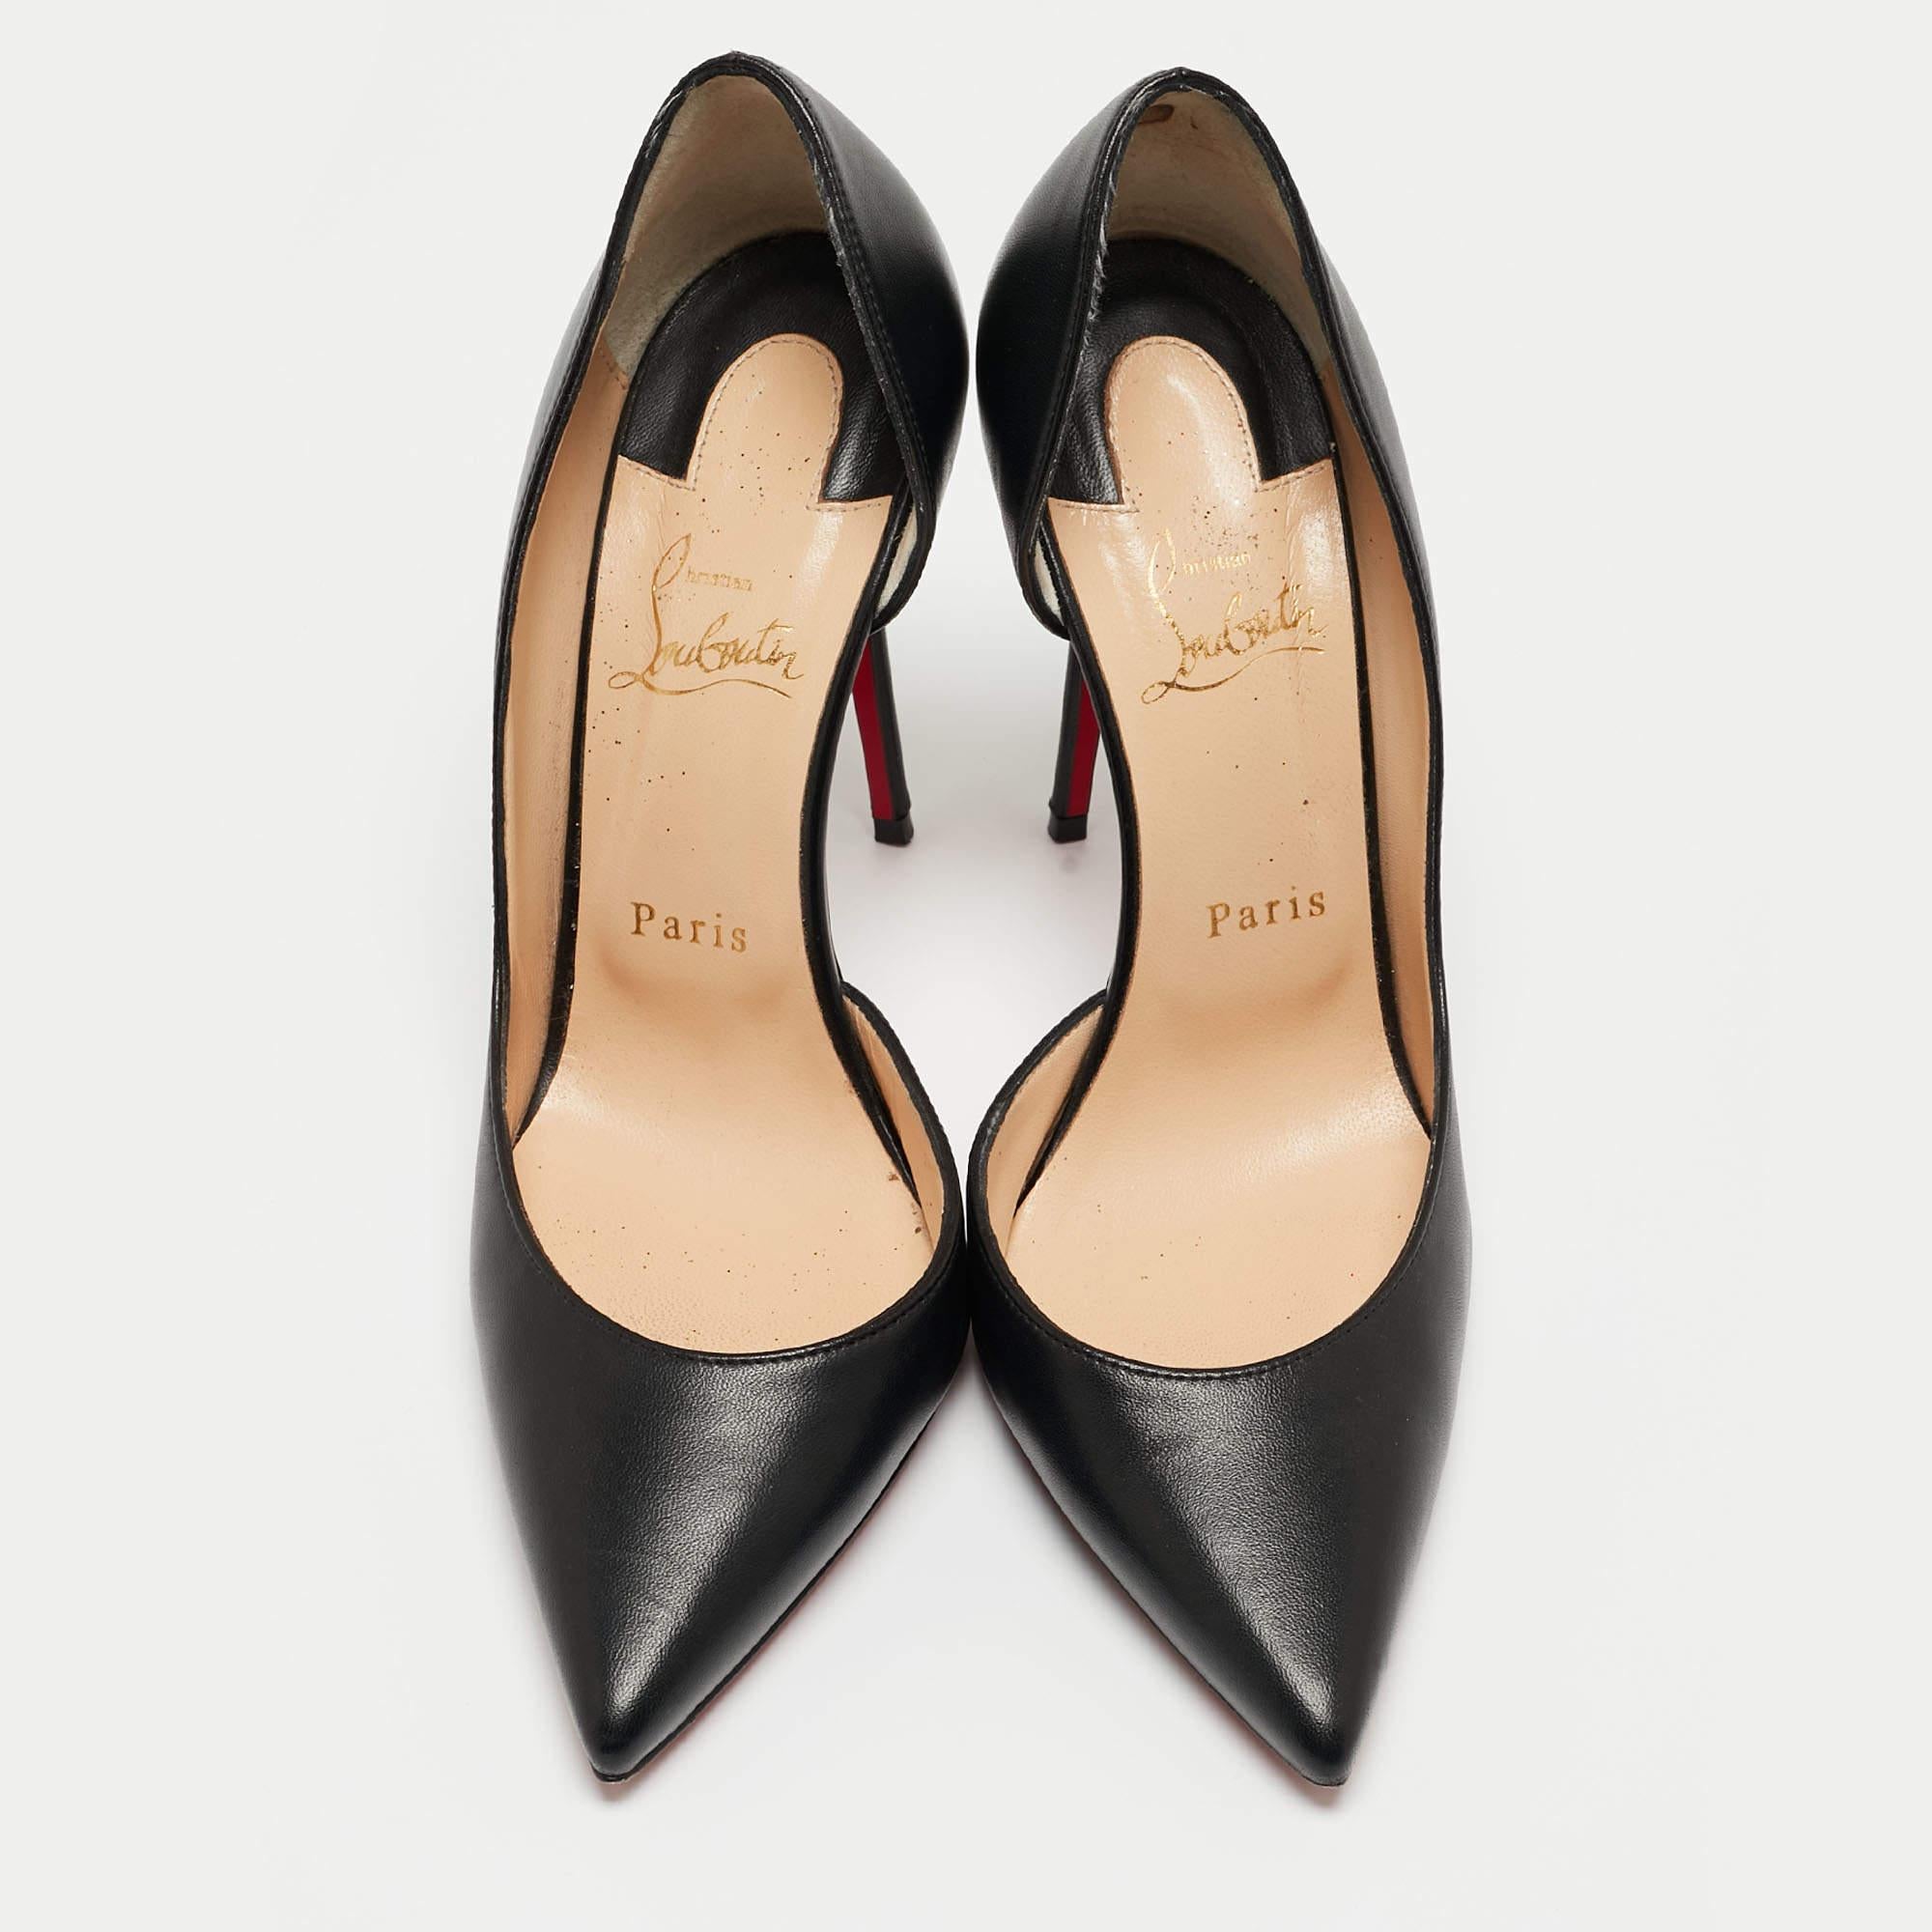 Curvaceous arches, a feminine appeal, and a well-built structure define this set of designer pumps. Coming with comfortable insoles and sleek heels, style them with your favorite outfits.

Includes: Original Dustbag, Original Box, Extra Heel Tips

